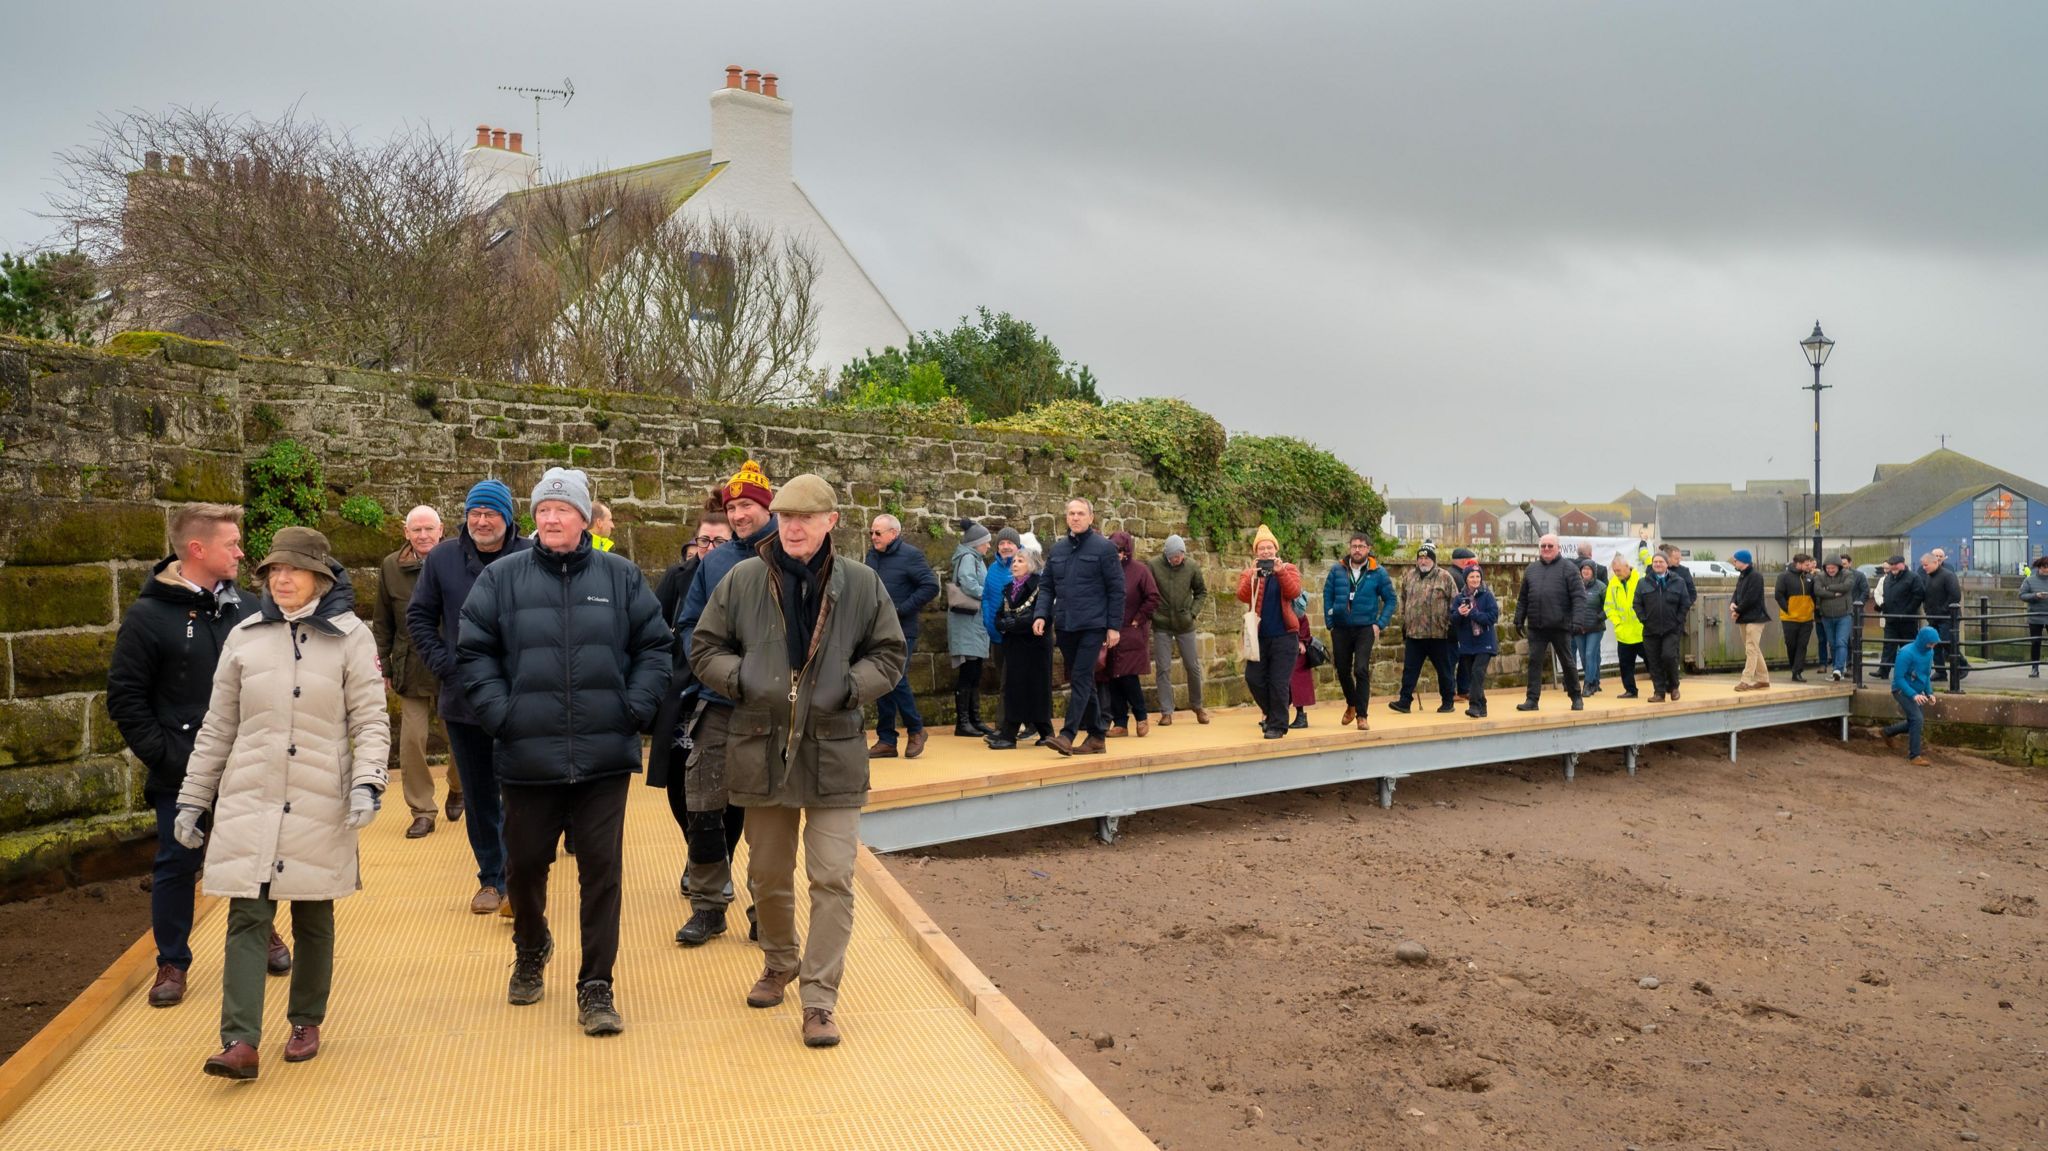 Locals and visitors arriving for the official Boardwalk opening